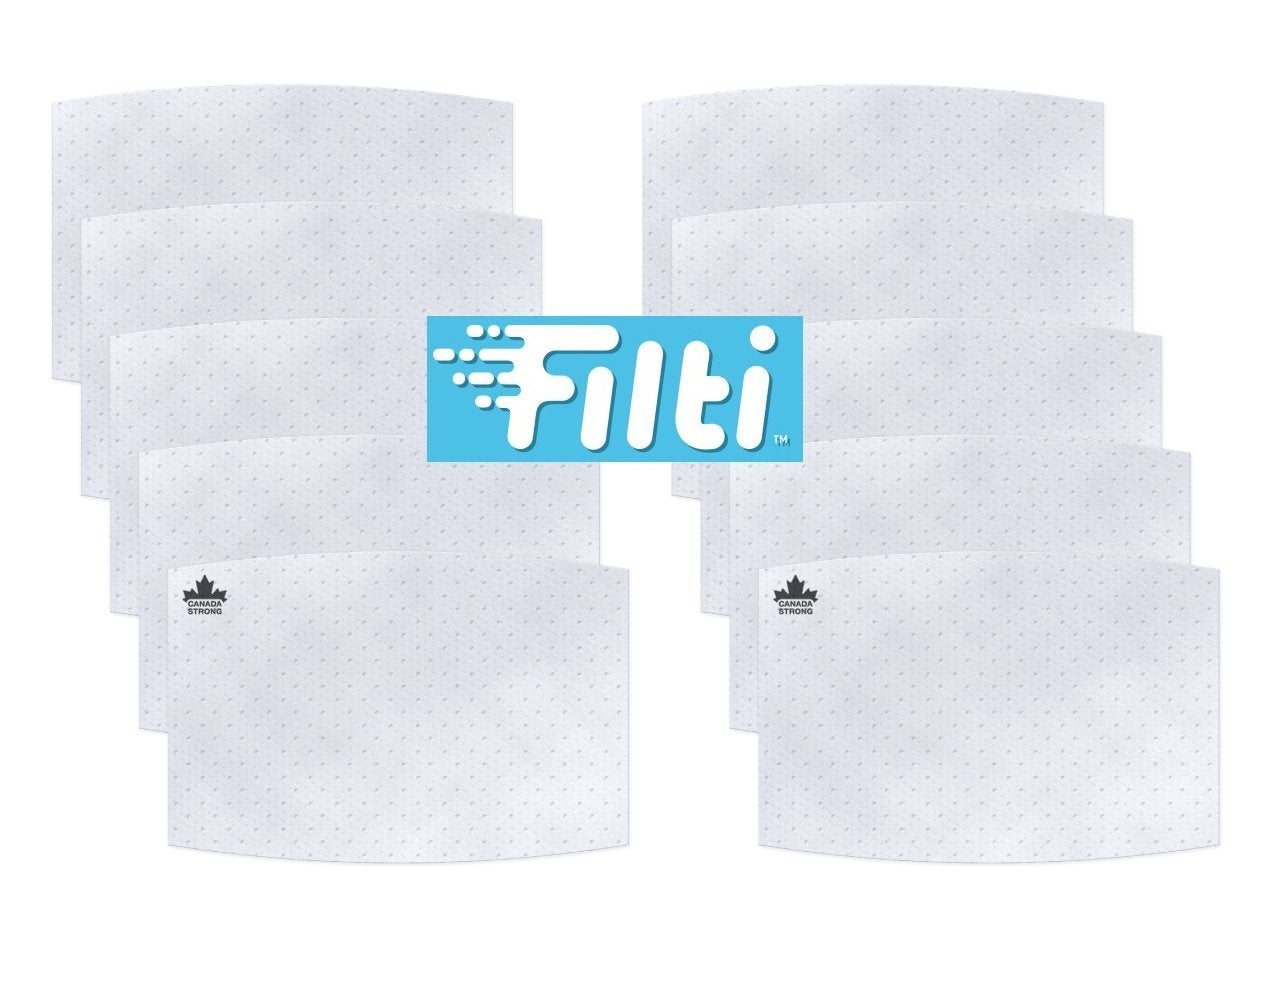 Filti Face Mask insert protective nano filters made in  Canada  - The Peoples Mask Edmonton